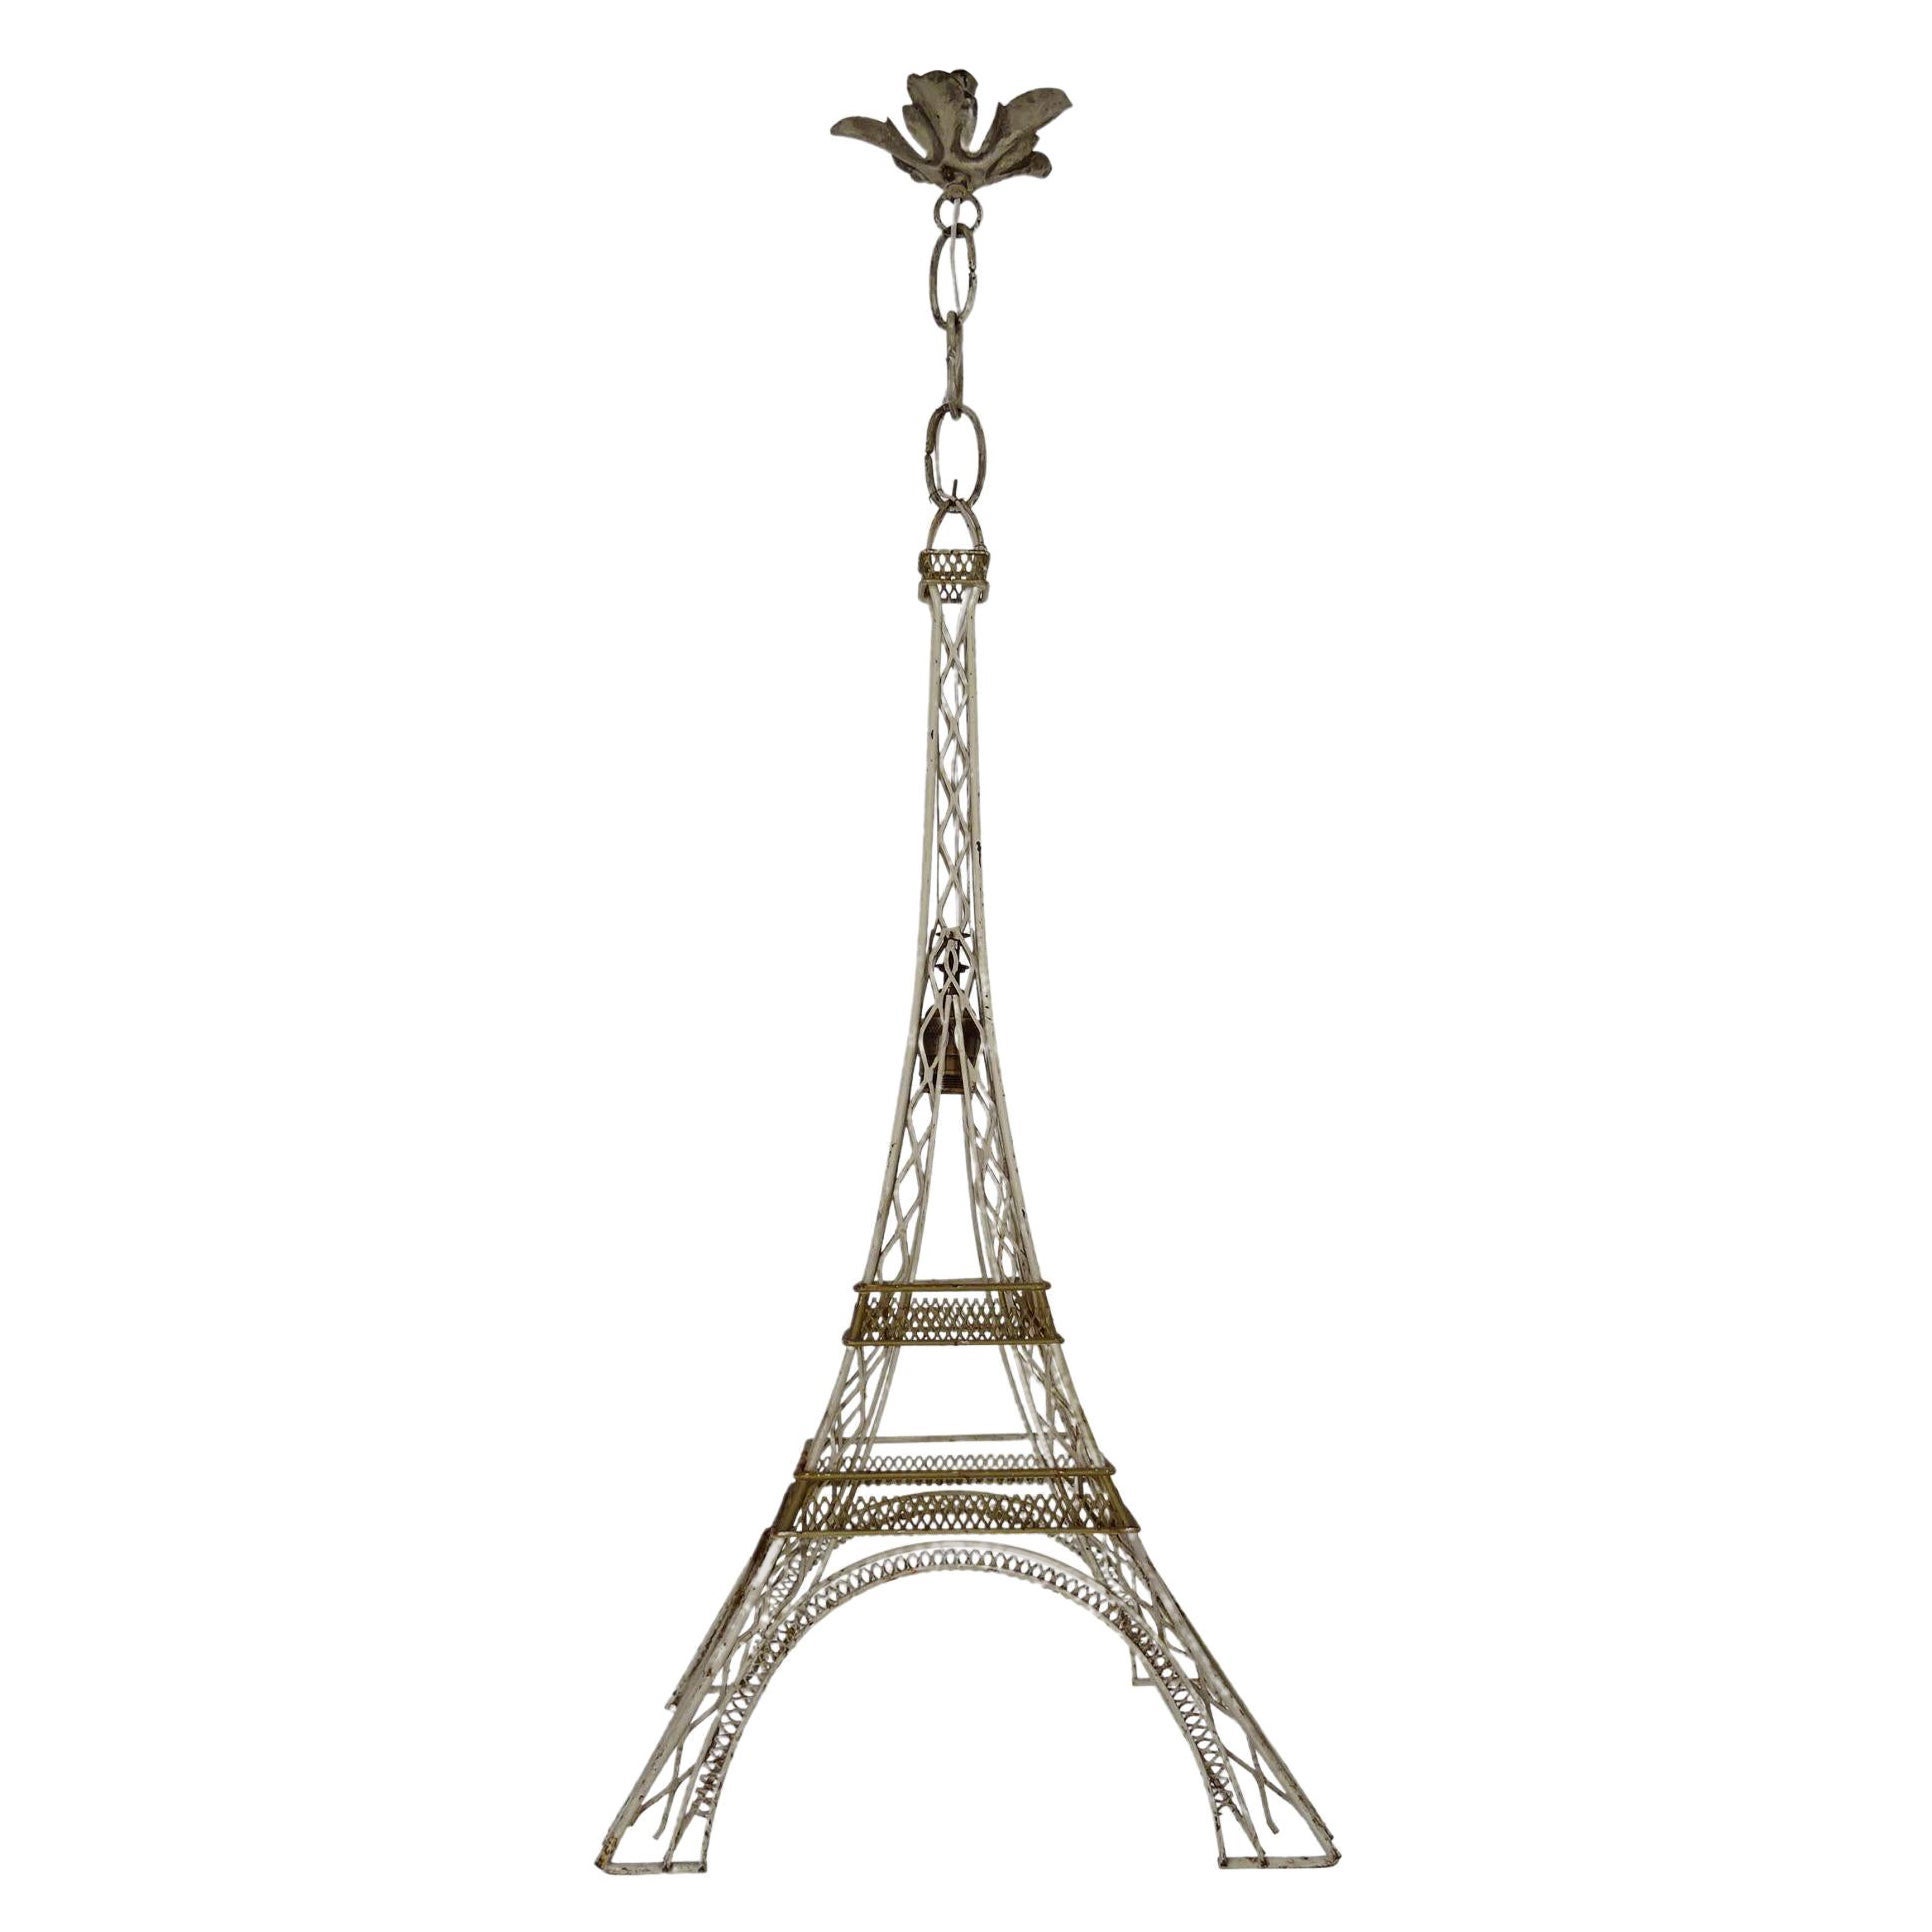 French Eiffel Tower Tole Cream & Gold Paris Chandelier circa 1940 One of a Kind